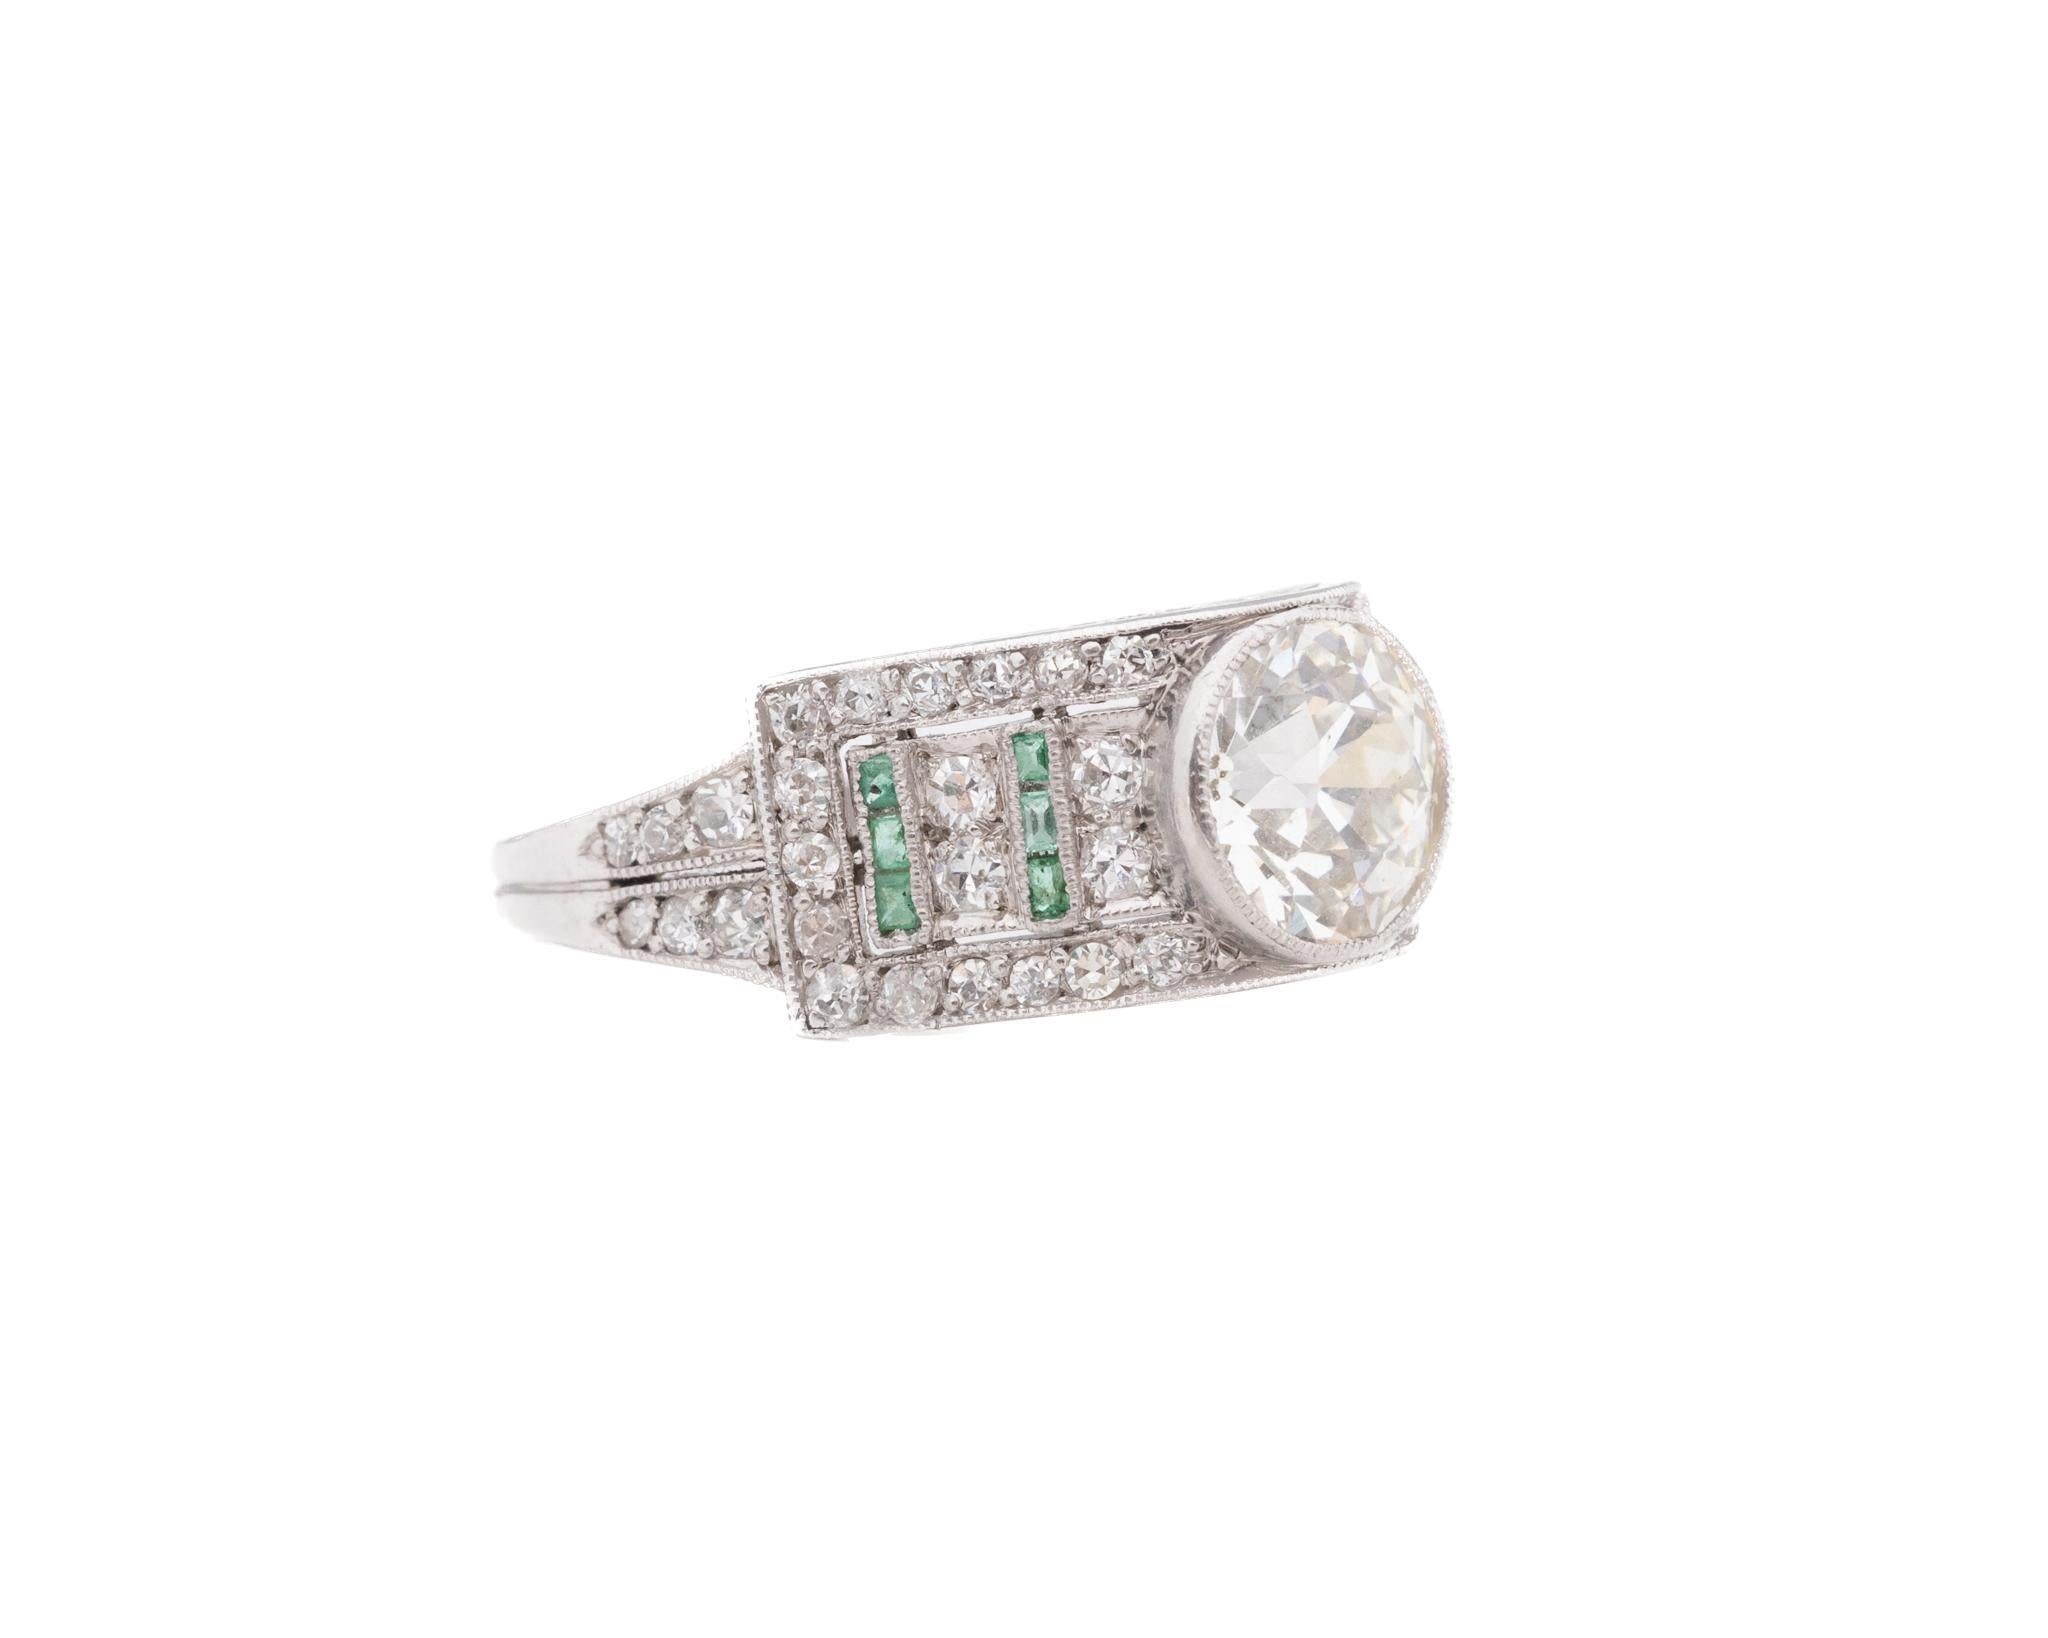 Circa 1920s Art Deco Emerald and Old European Diamond Engagement Ring For Sale 2